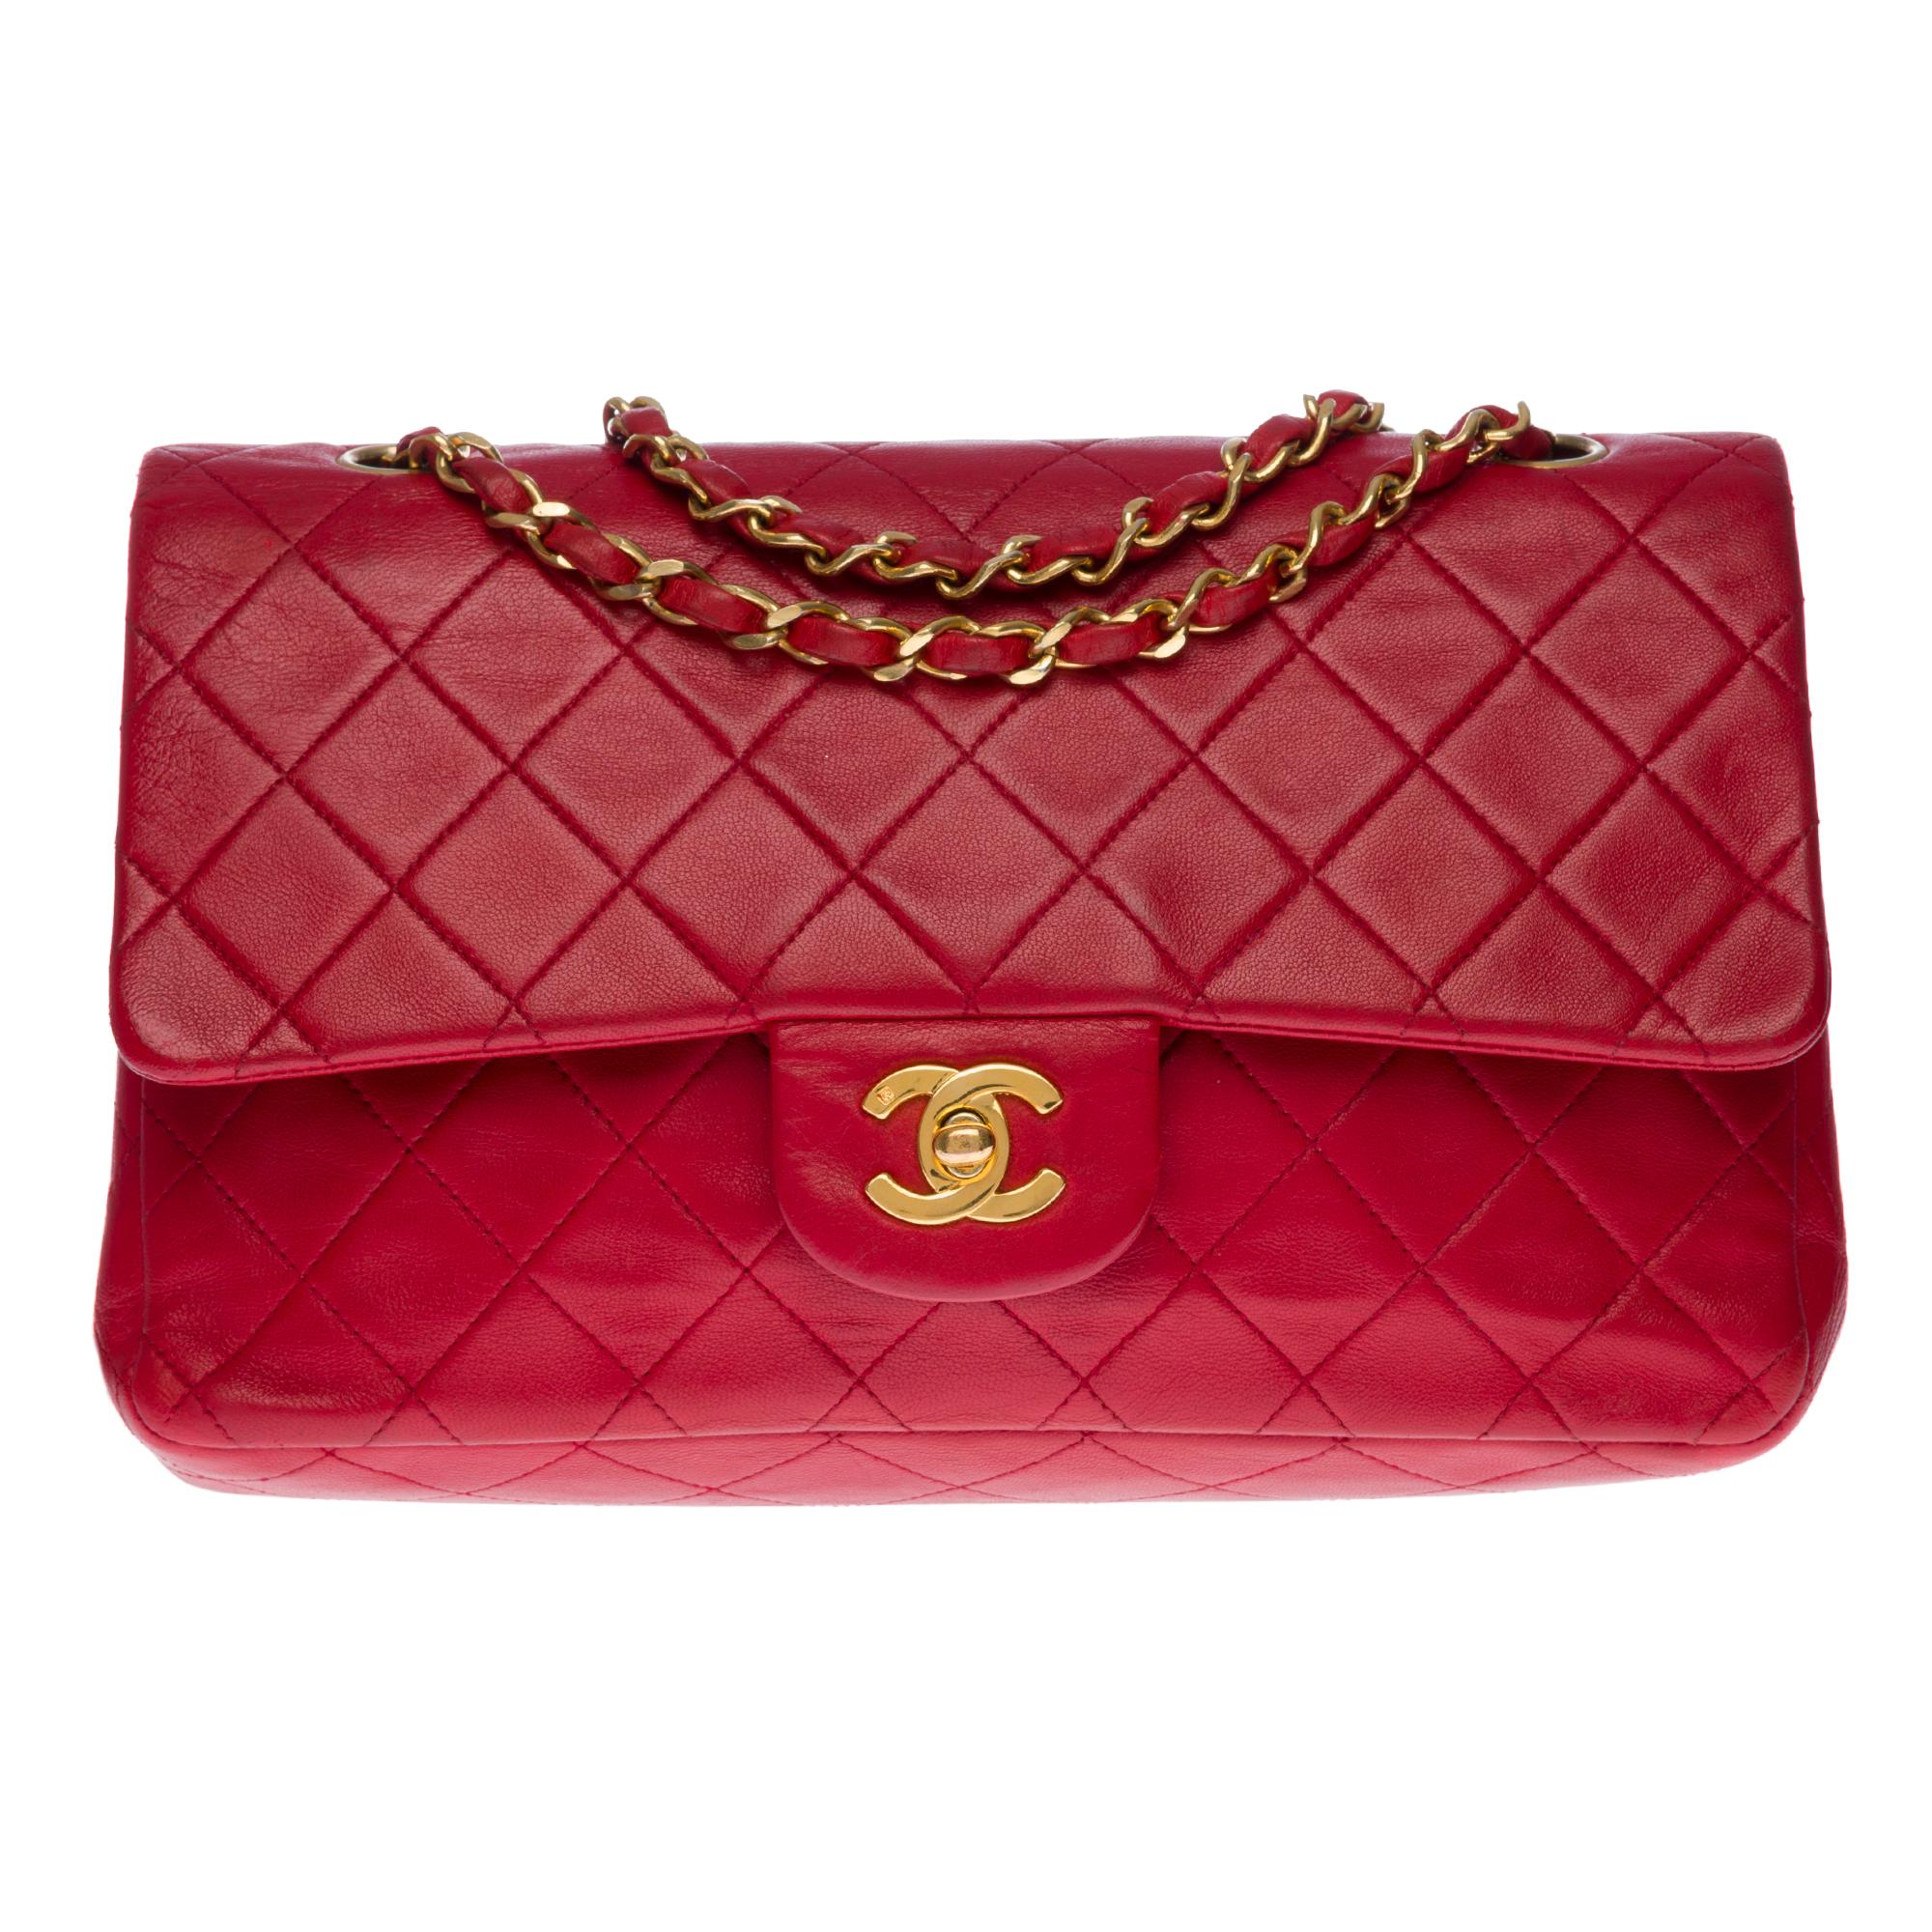 Chanel Timeless Medium double flap Shoulder bag in Red quilted leather, GHW